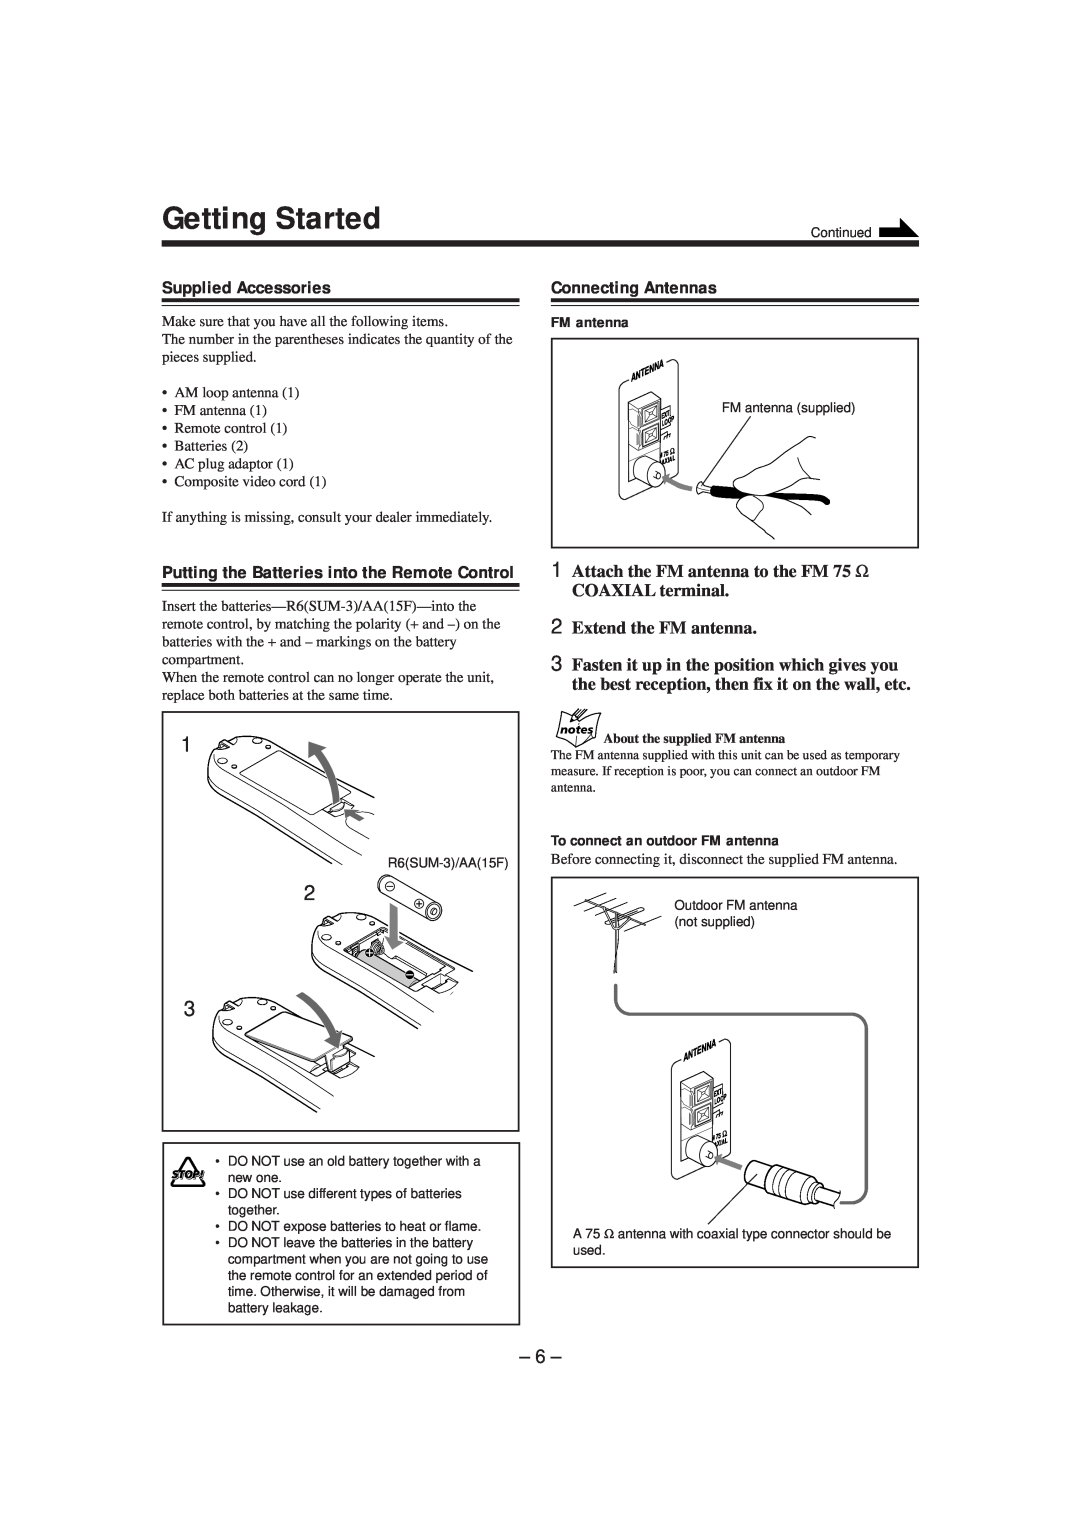 JVC GVT0057-016A manual Getting Started, Supplied Accessories, Connecting Antennas, To connect an outdoor FM antenna 